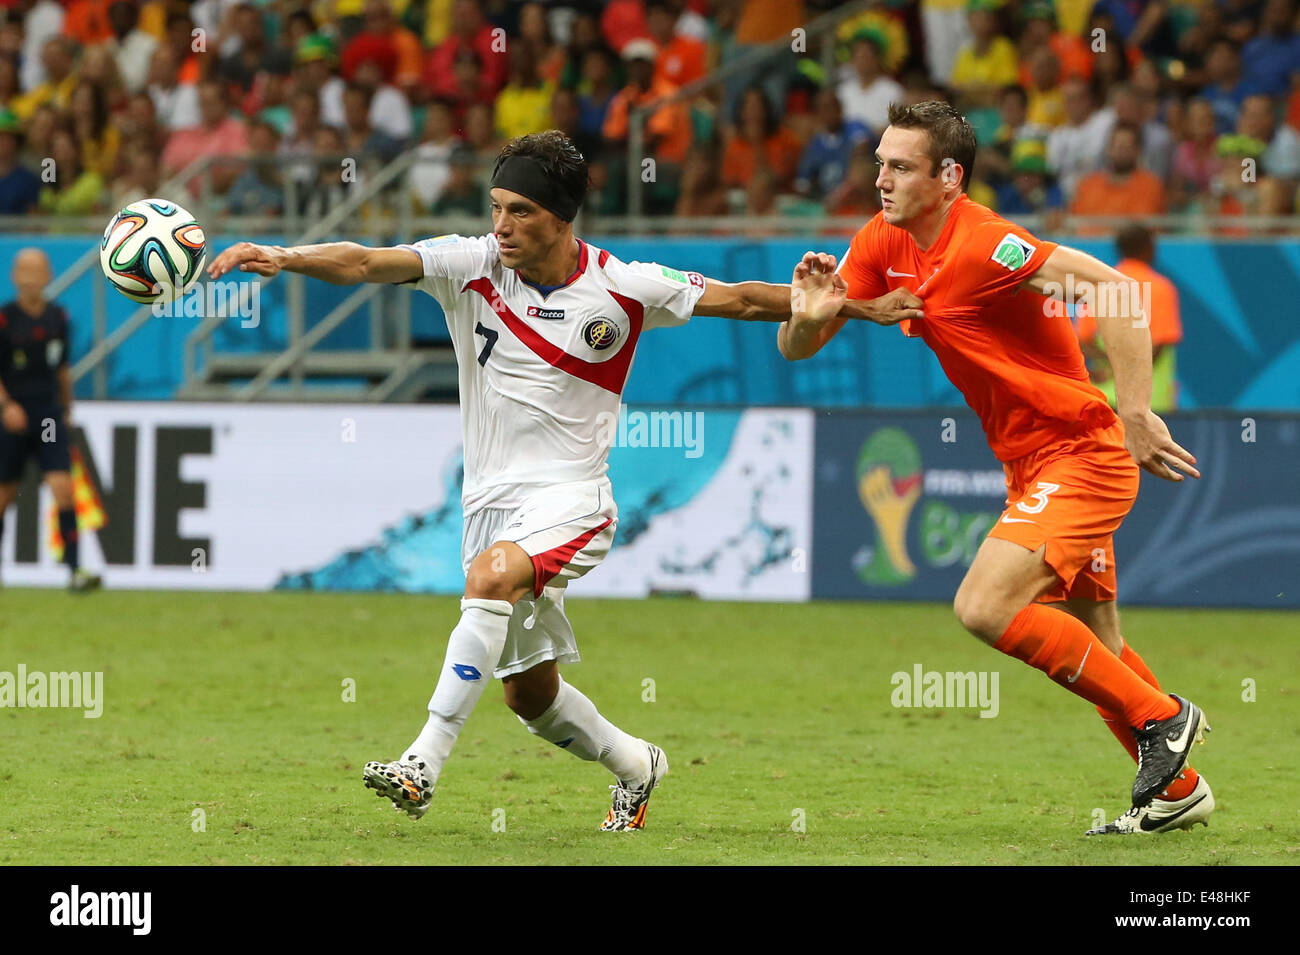 Salvador, Brazil. 5th July, 2014. Costa Rica's Christian Bolanos (L) vies with Netherlands' Stefan de Vrij during a quarter-finals match between Netherlands and Costa Rica of 2014 FIFA World Cup at the Arena Fonte Nova Stadium in Salvador, Brazil, on July 5, 2014. Credit:  Guo Yong/Xinhua/Alamy Live News Stock Photo